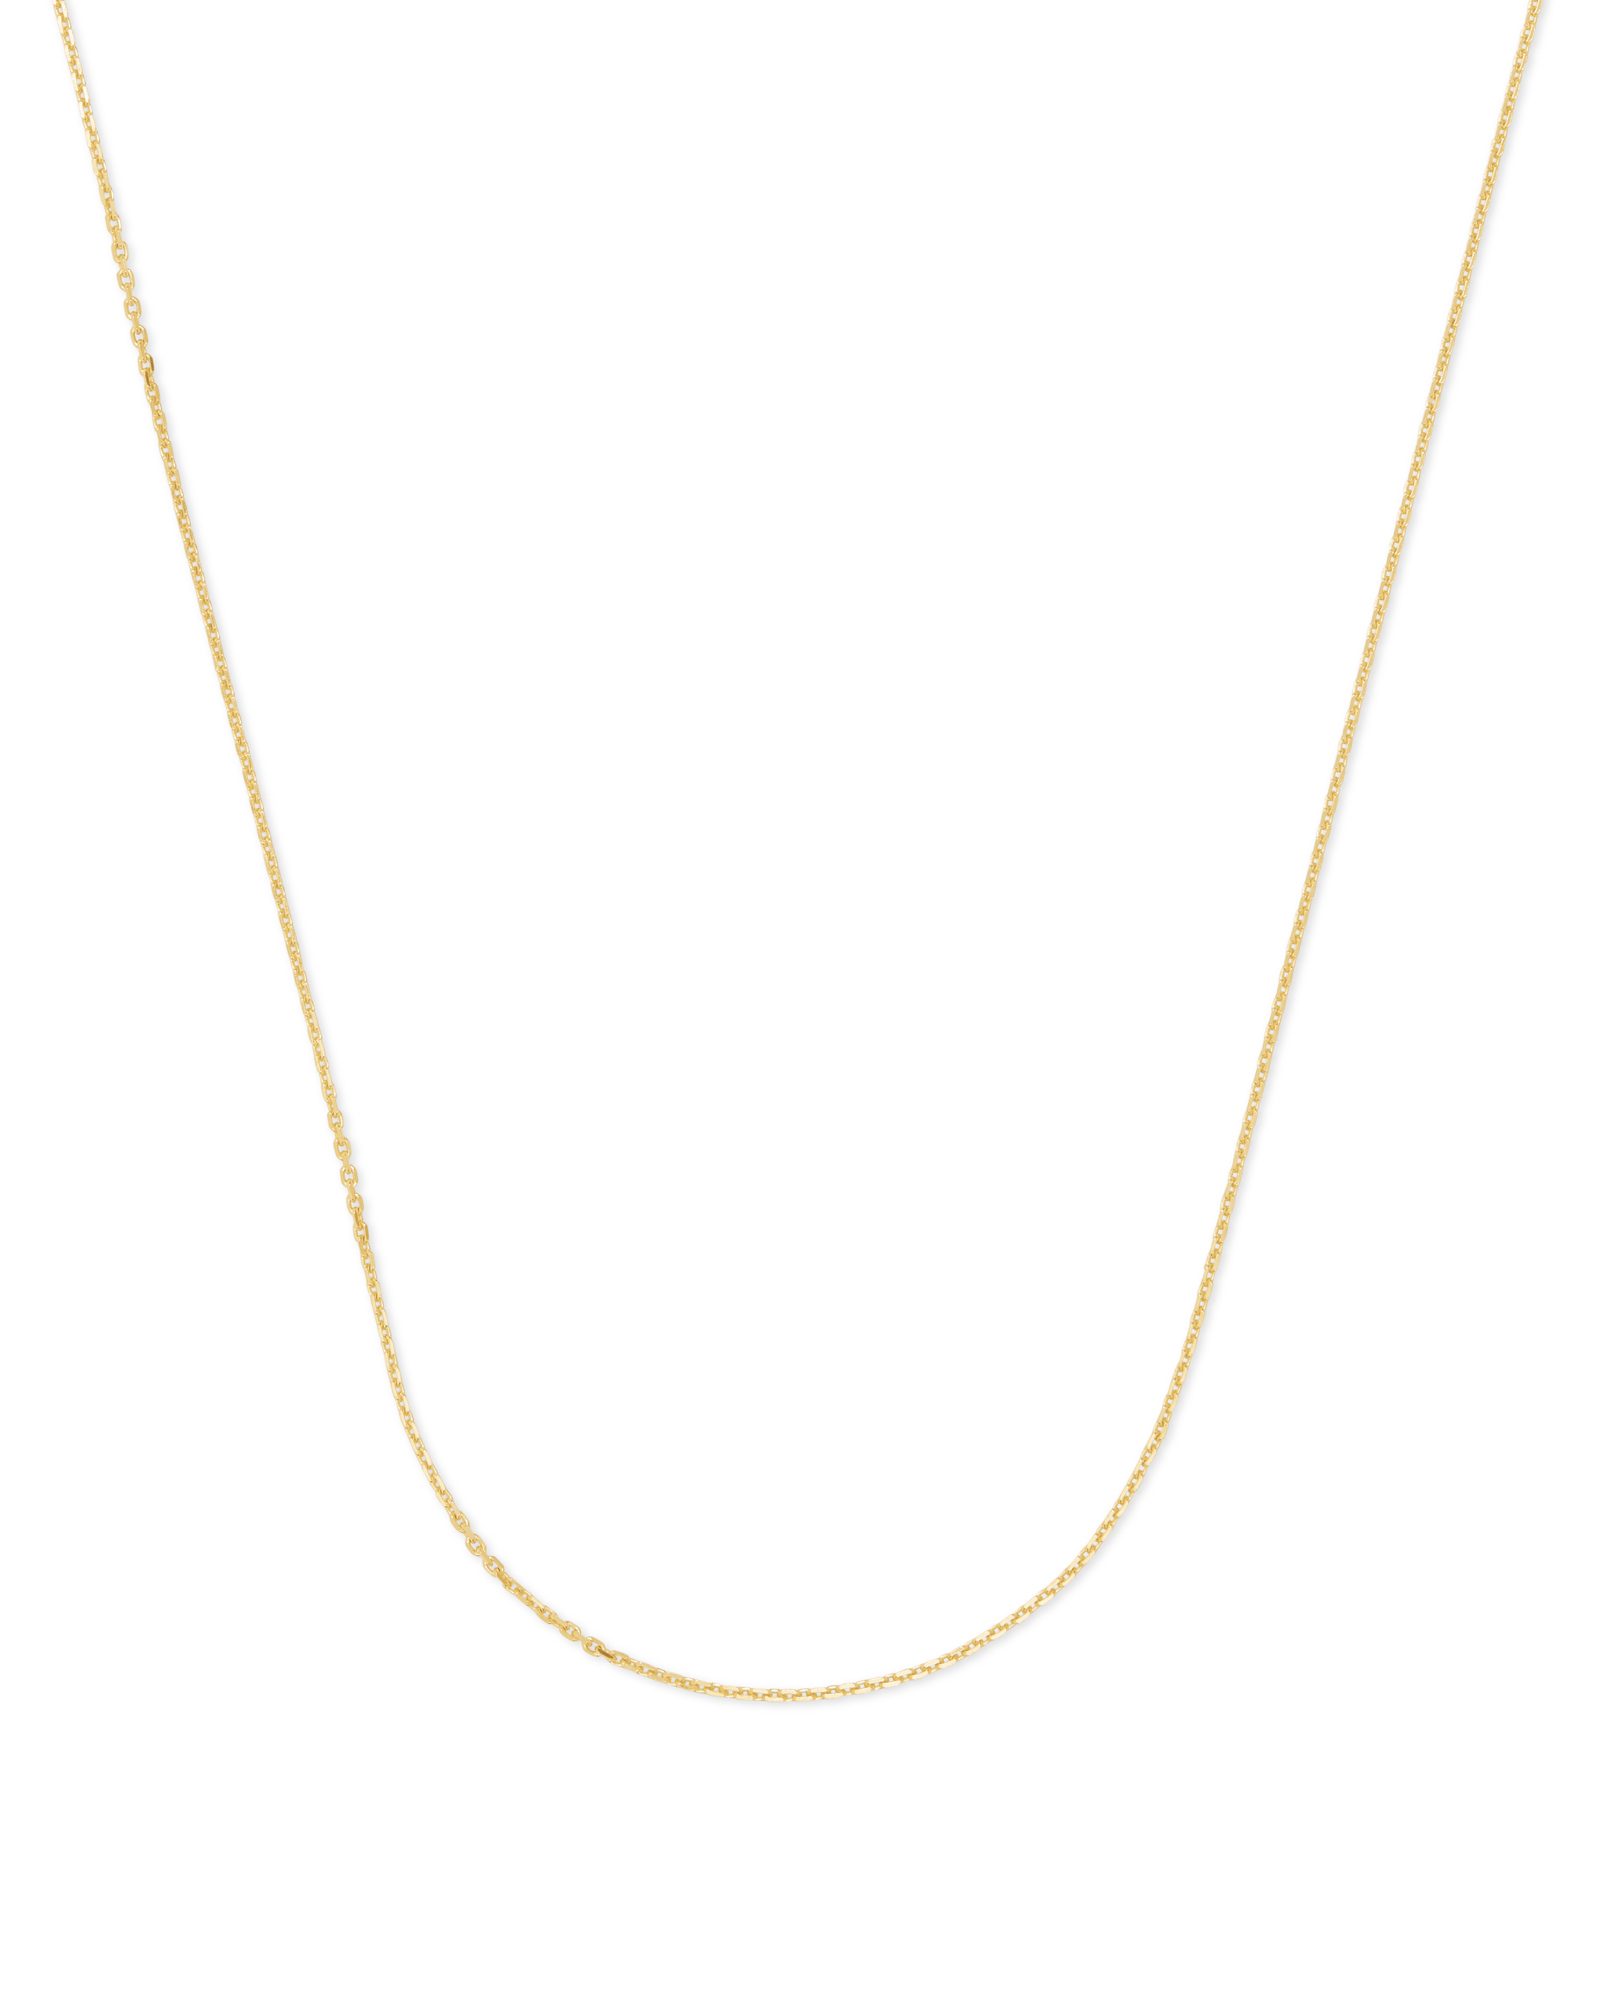 18k Gold Thin Mens Necklace Chain Gold Chain Necklace Thin 